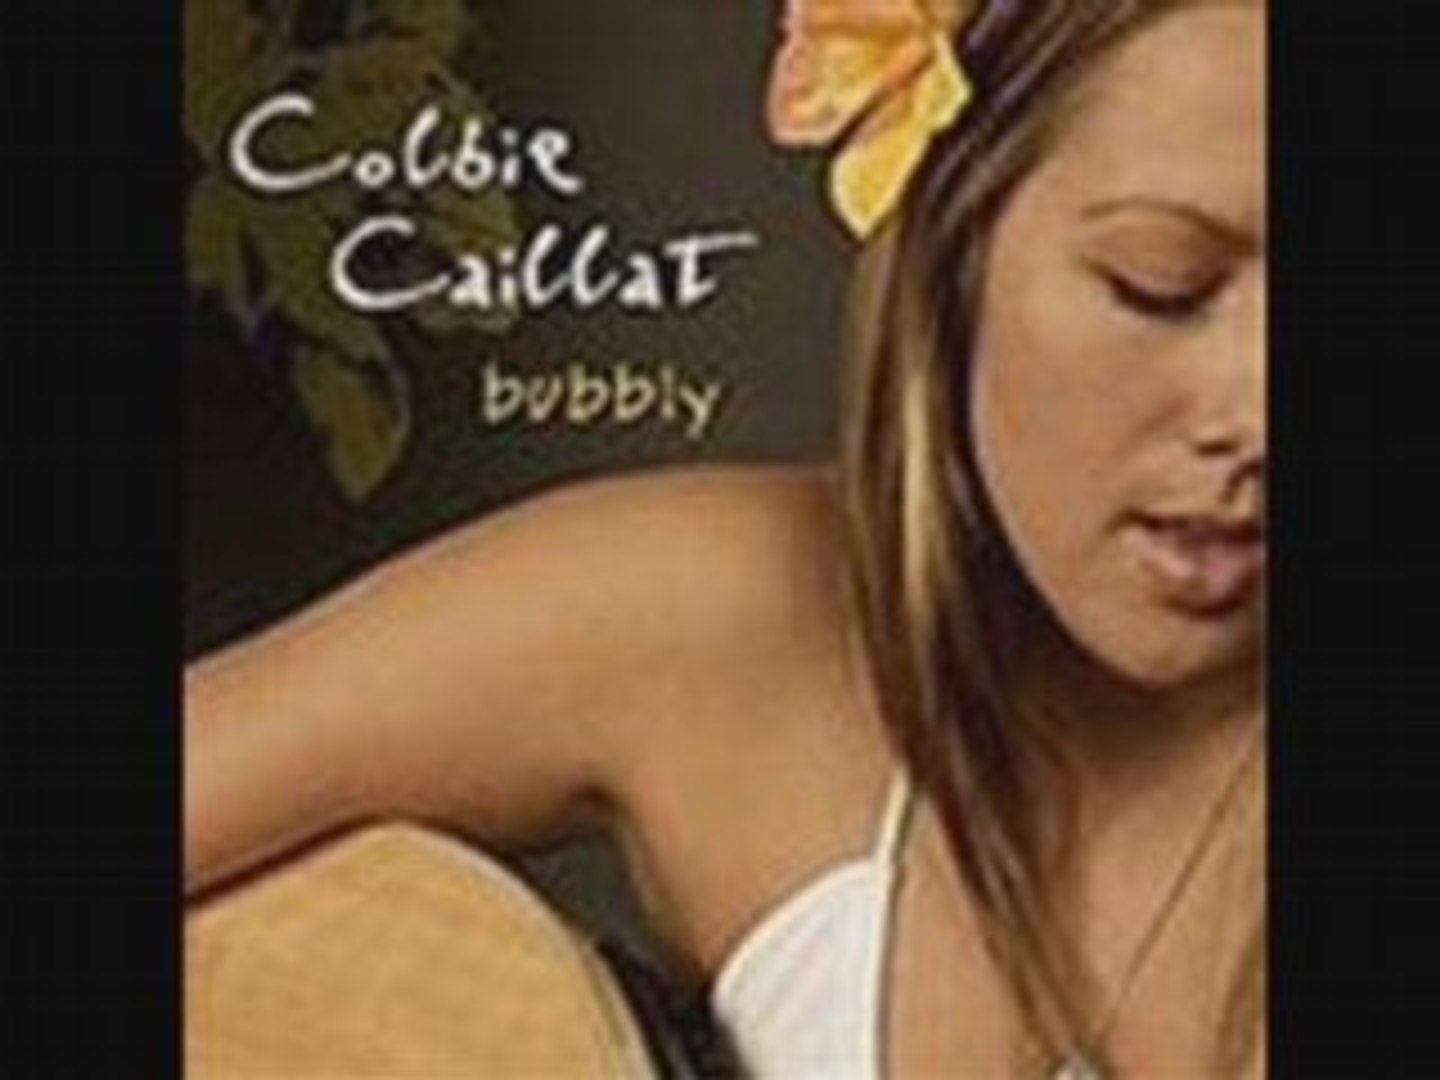 Colbie Caillat - Bubbly (Chipmunk Version)